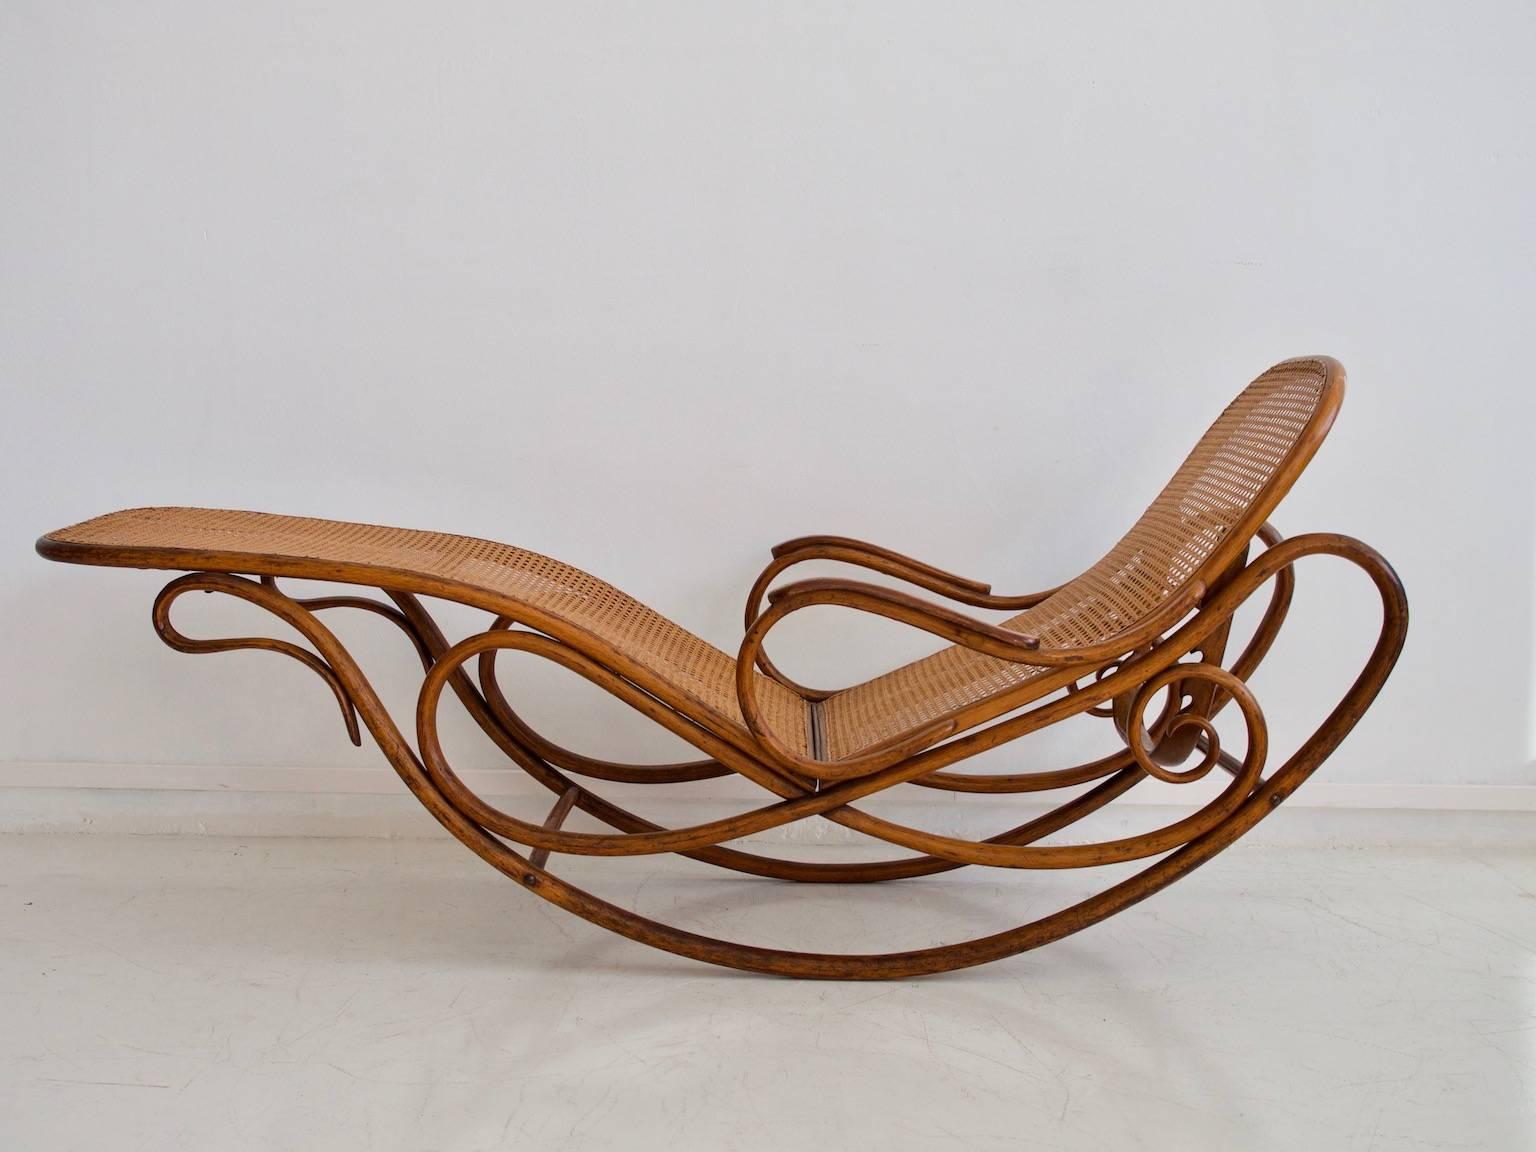 Bent beechwood lounger model 7500 with adjustable backrest and high braided back and seat. Designed in 1881 and manufactured by Thonet in Vienna, Austria.

Literature: Bent Wood and Metal Furniture: 1850-1946: page 232.